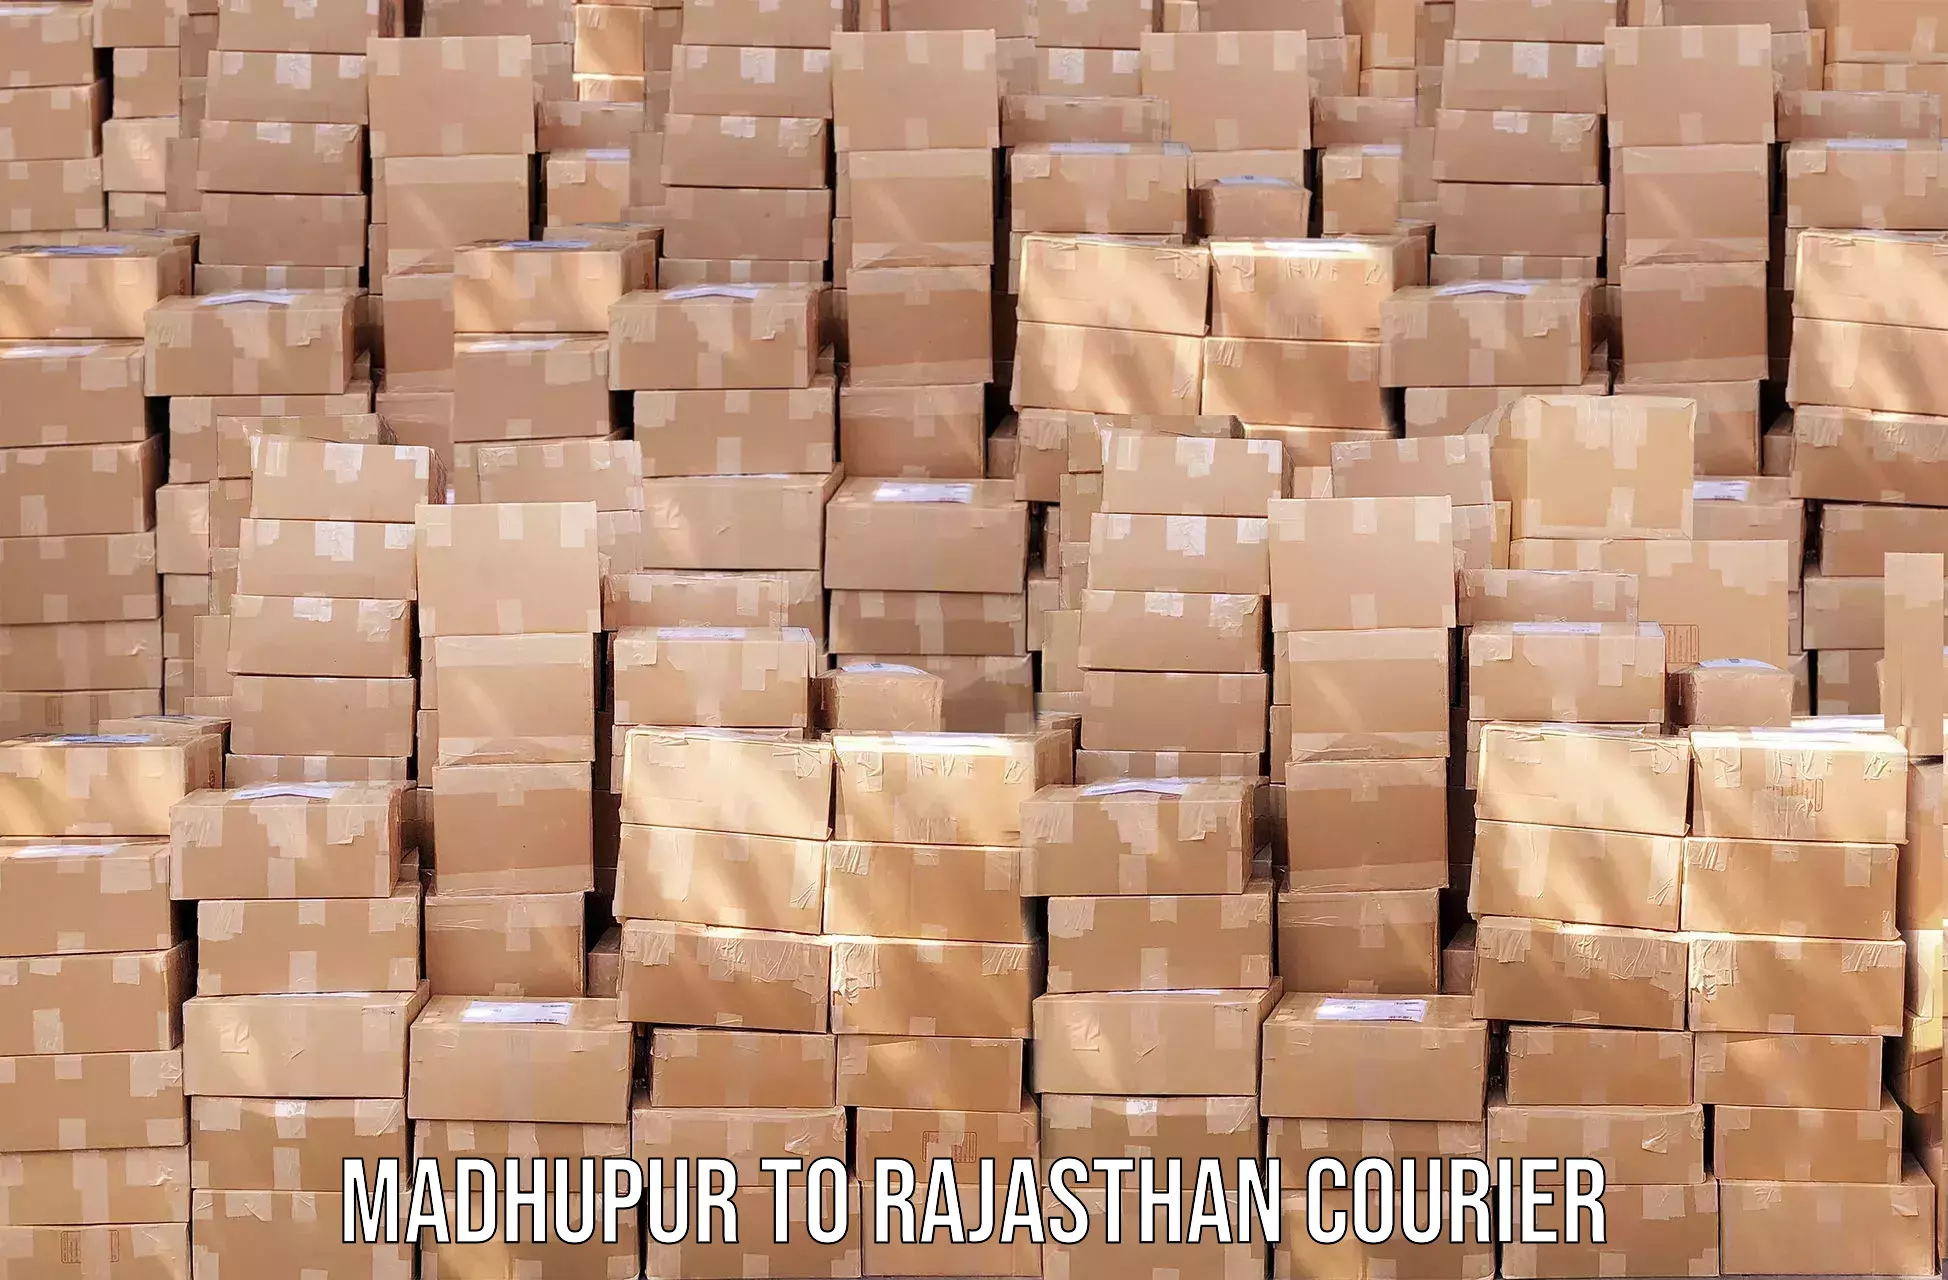 Cargo delivery service Madhupur to Raila